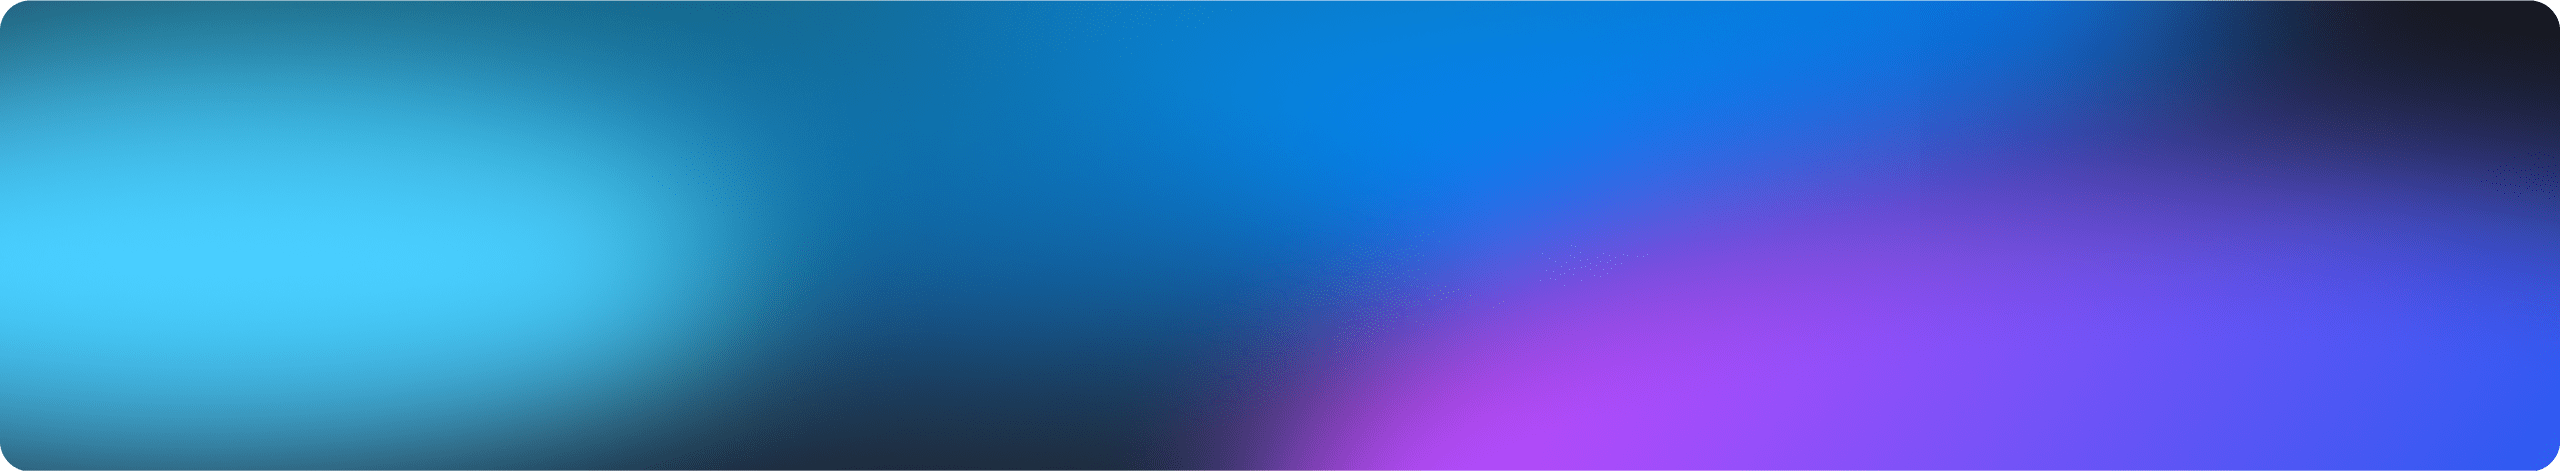 Share Your Ideas Background Gradient